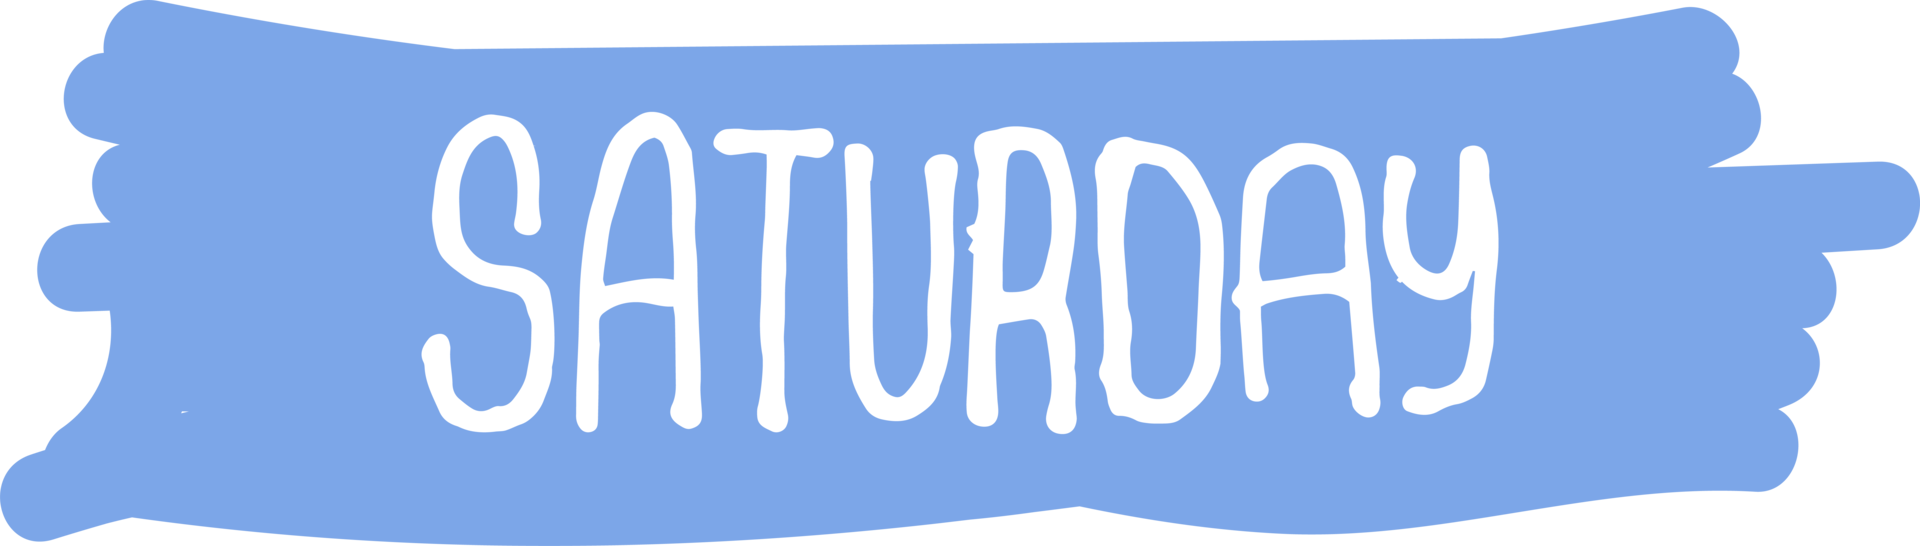 Saturday, cute day text lettering for weekly planners png